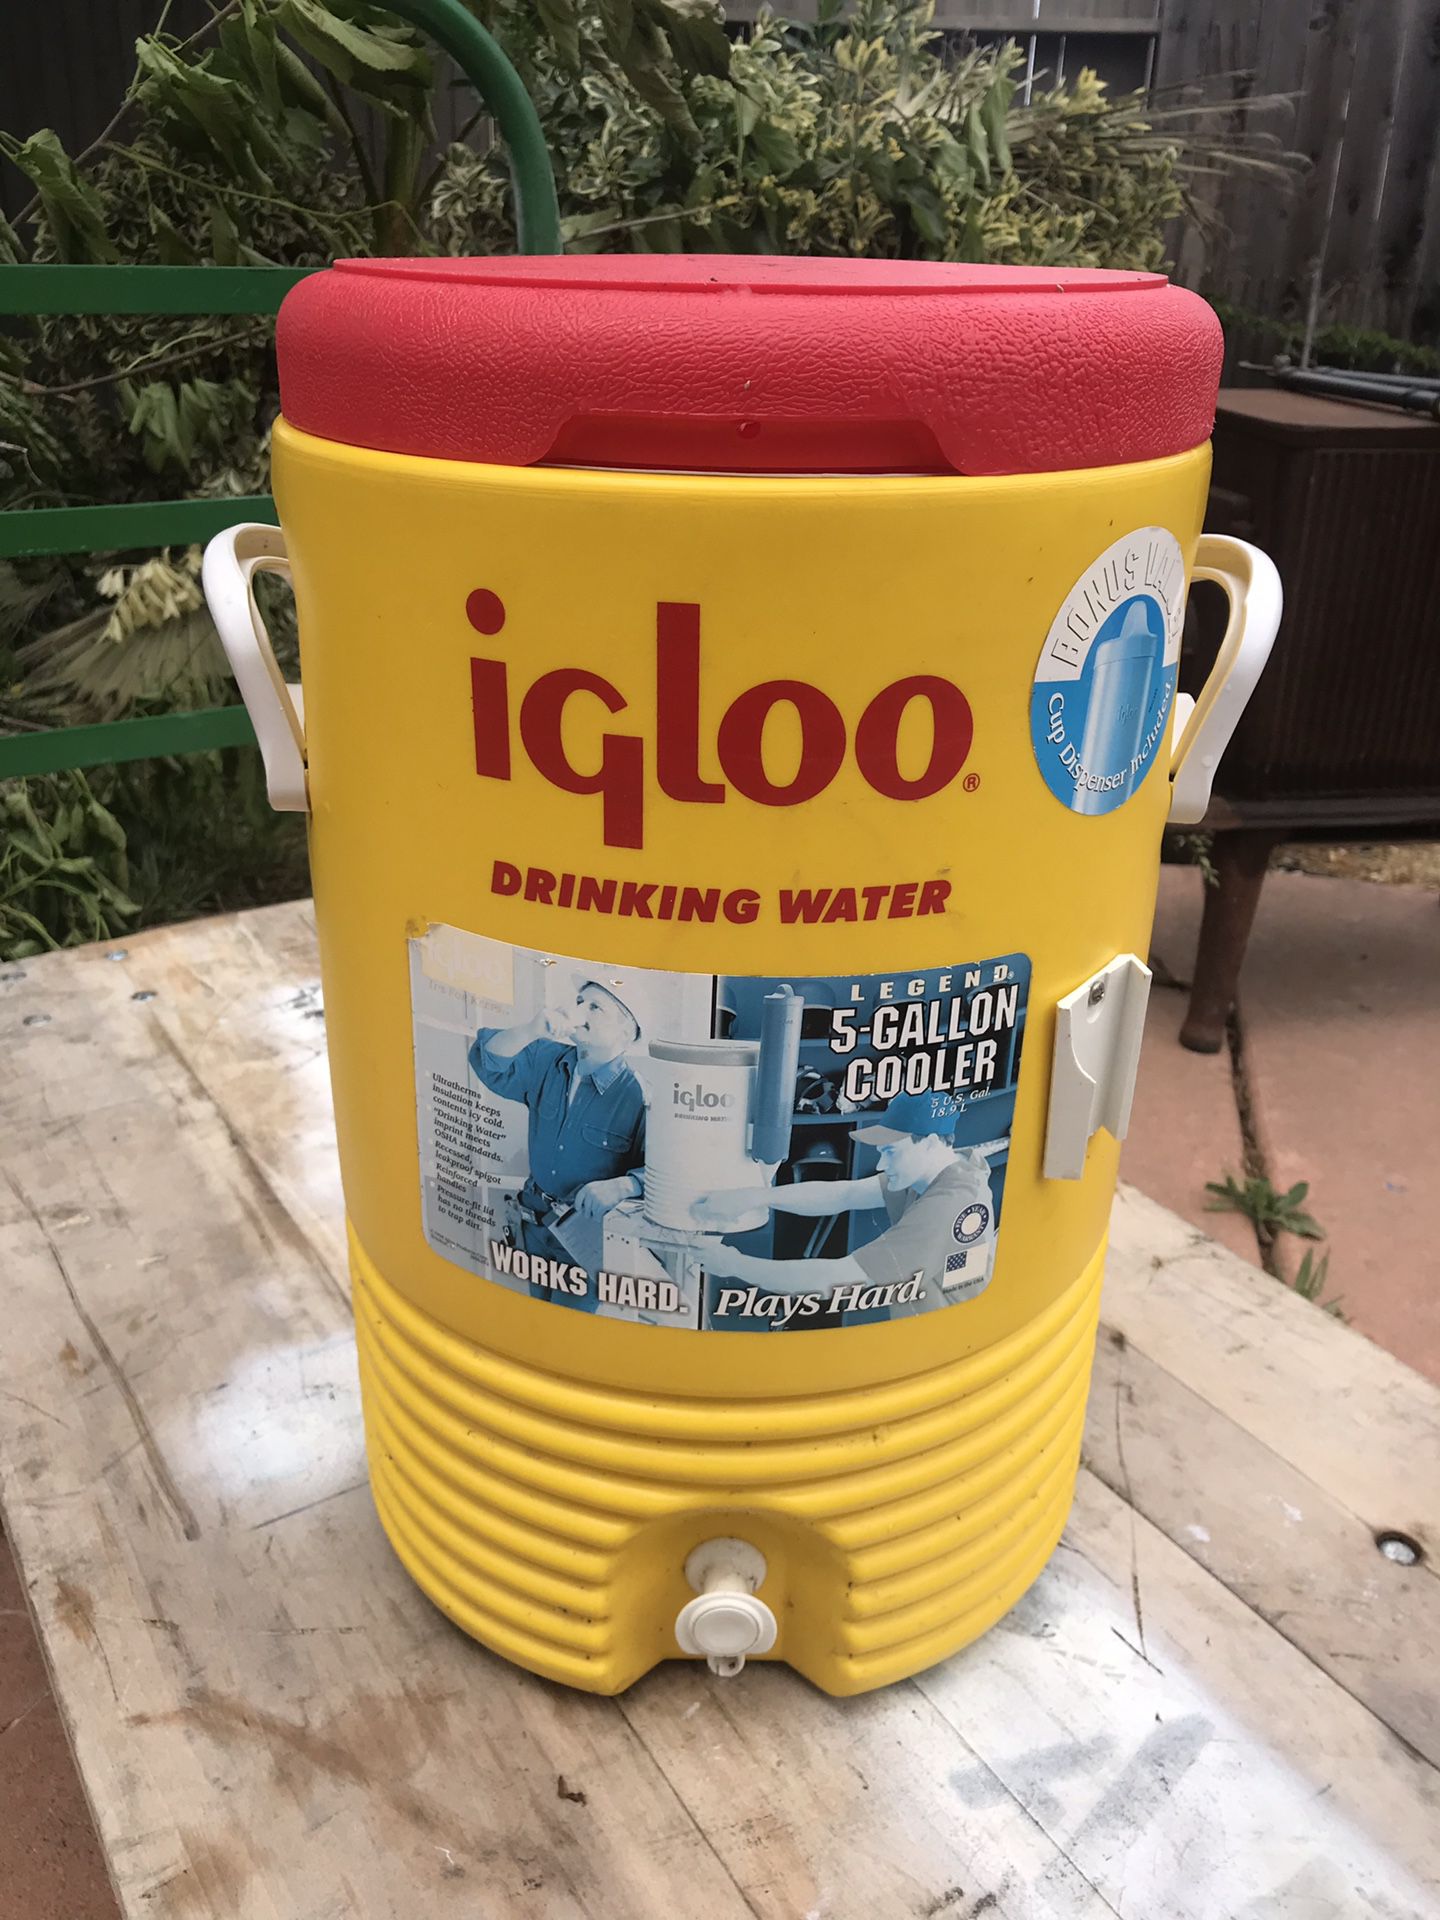 Igloo drinking water 5 gallon cooler yellow red